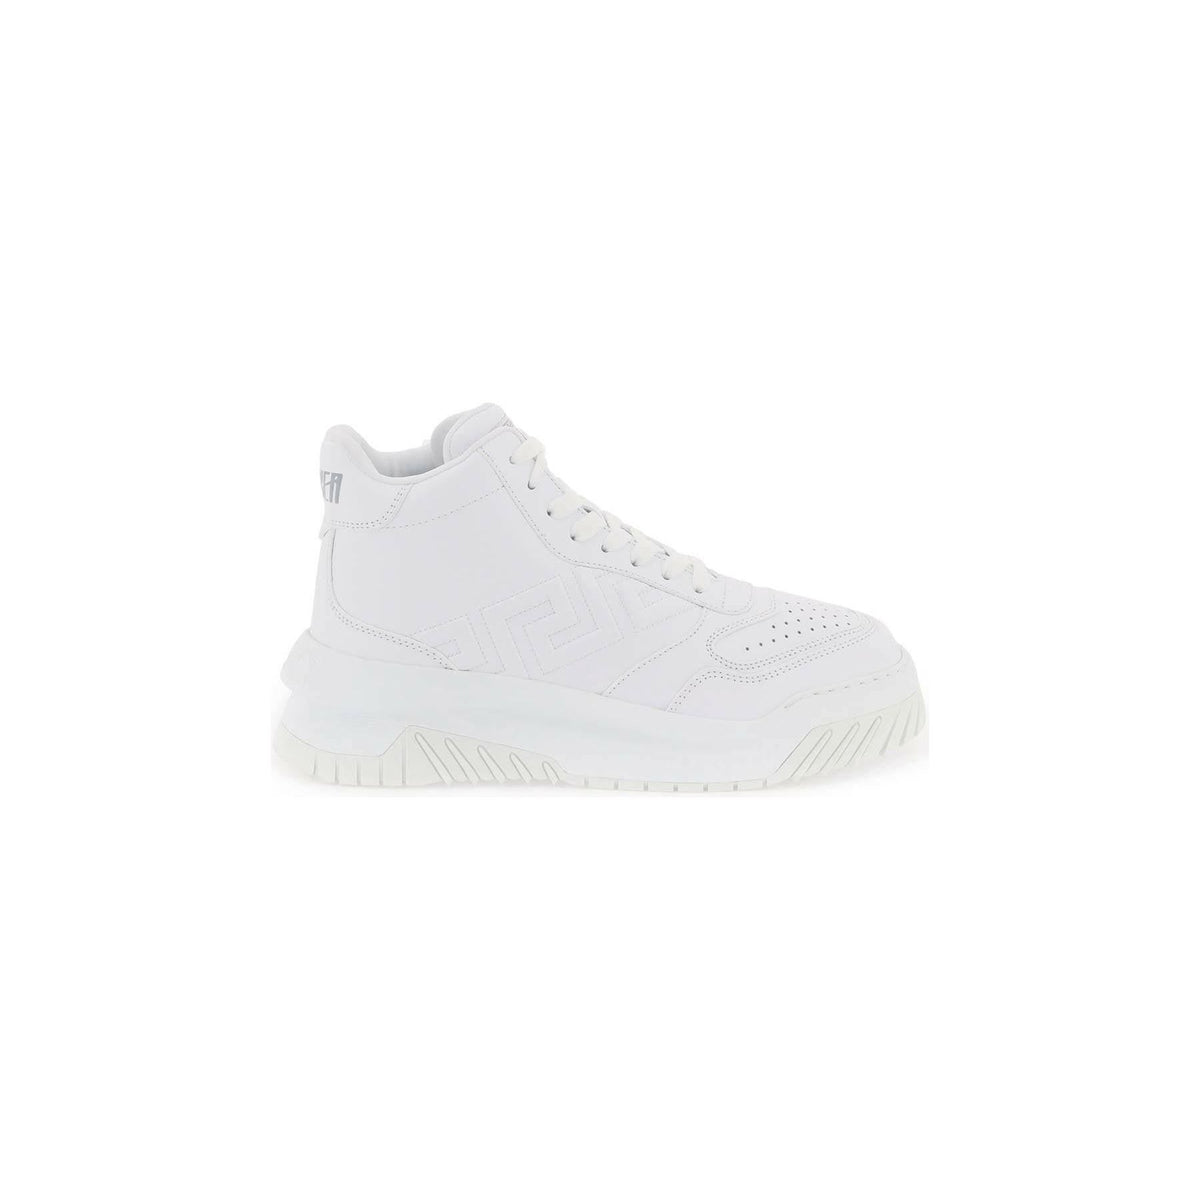 Optical White Smooth Leather Odissea Sneakers With Tone-On-Tone Embossed Motif VERSACE JOHN JULIA.